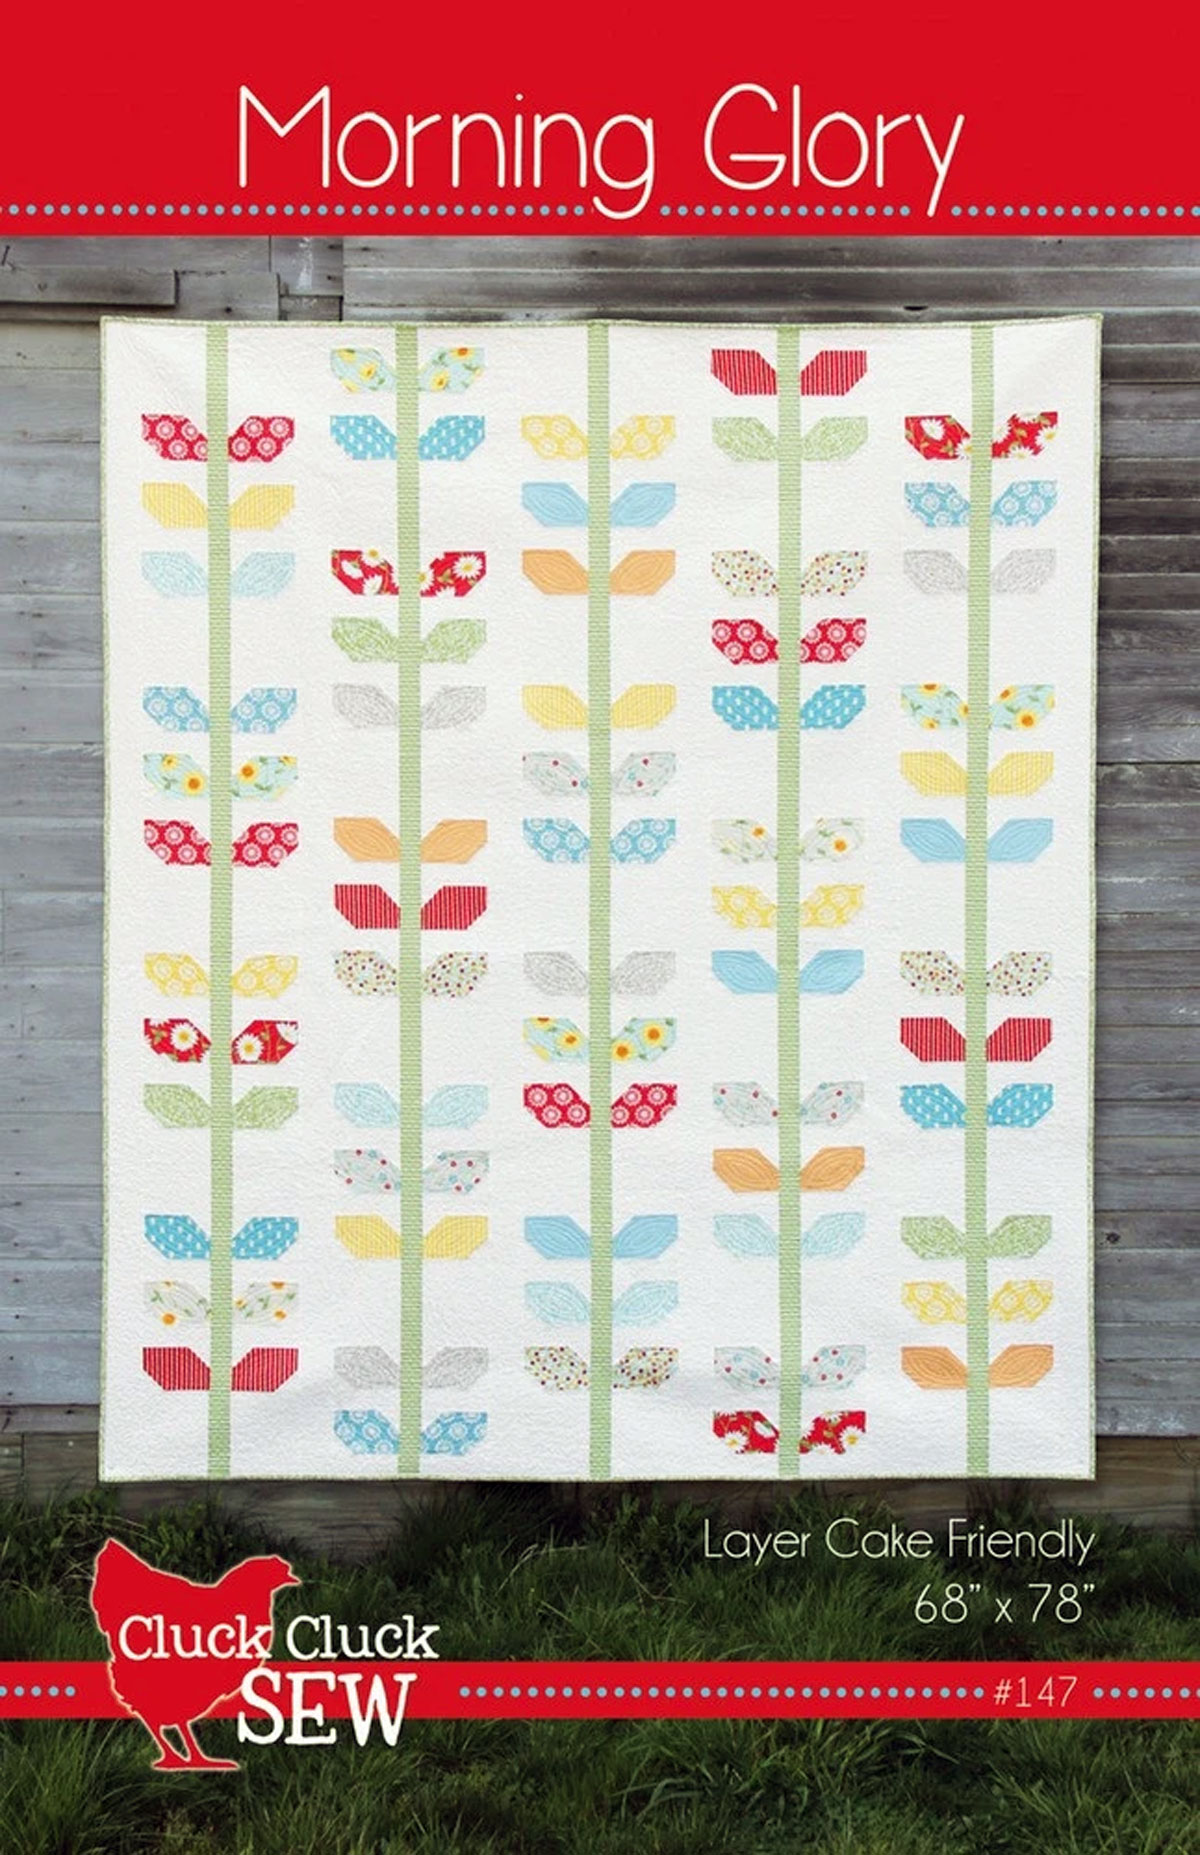 Morning-Glory-quilt-sewing-pattern-Cluck-Cluck-Sew-front